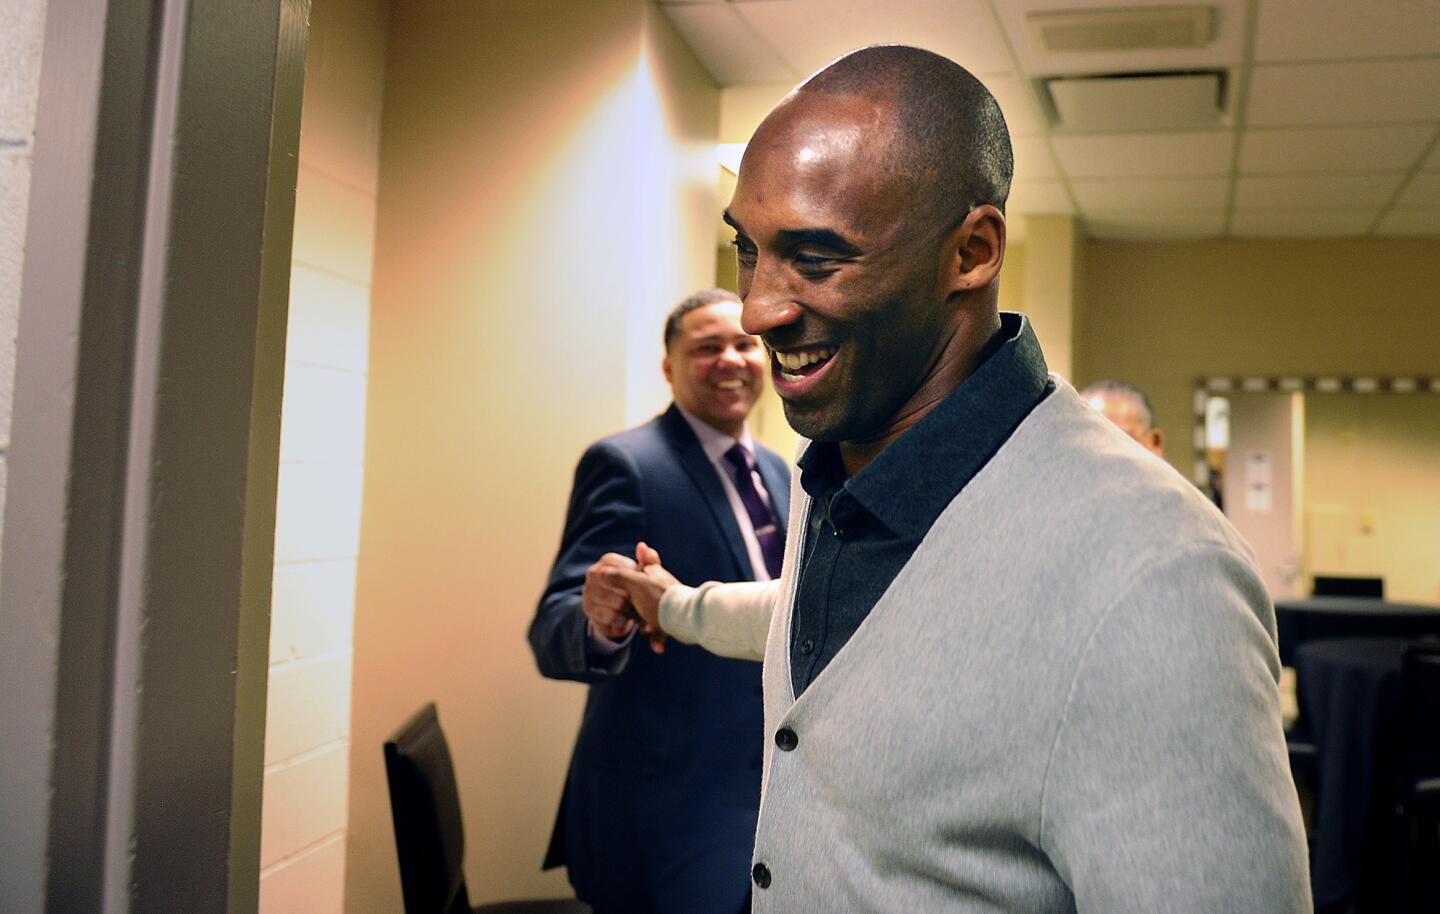 Kobe Bryant greets friends before the Lakers' game against the Pelicans in New Orleans.